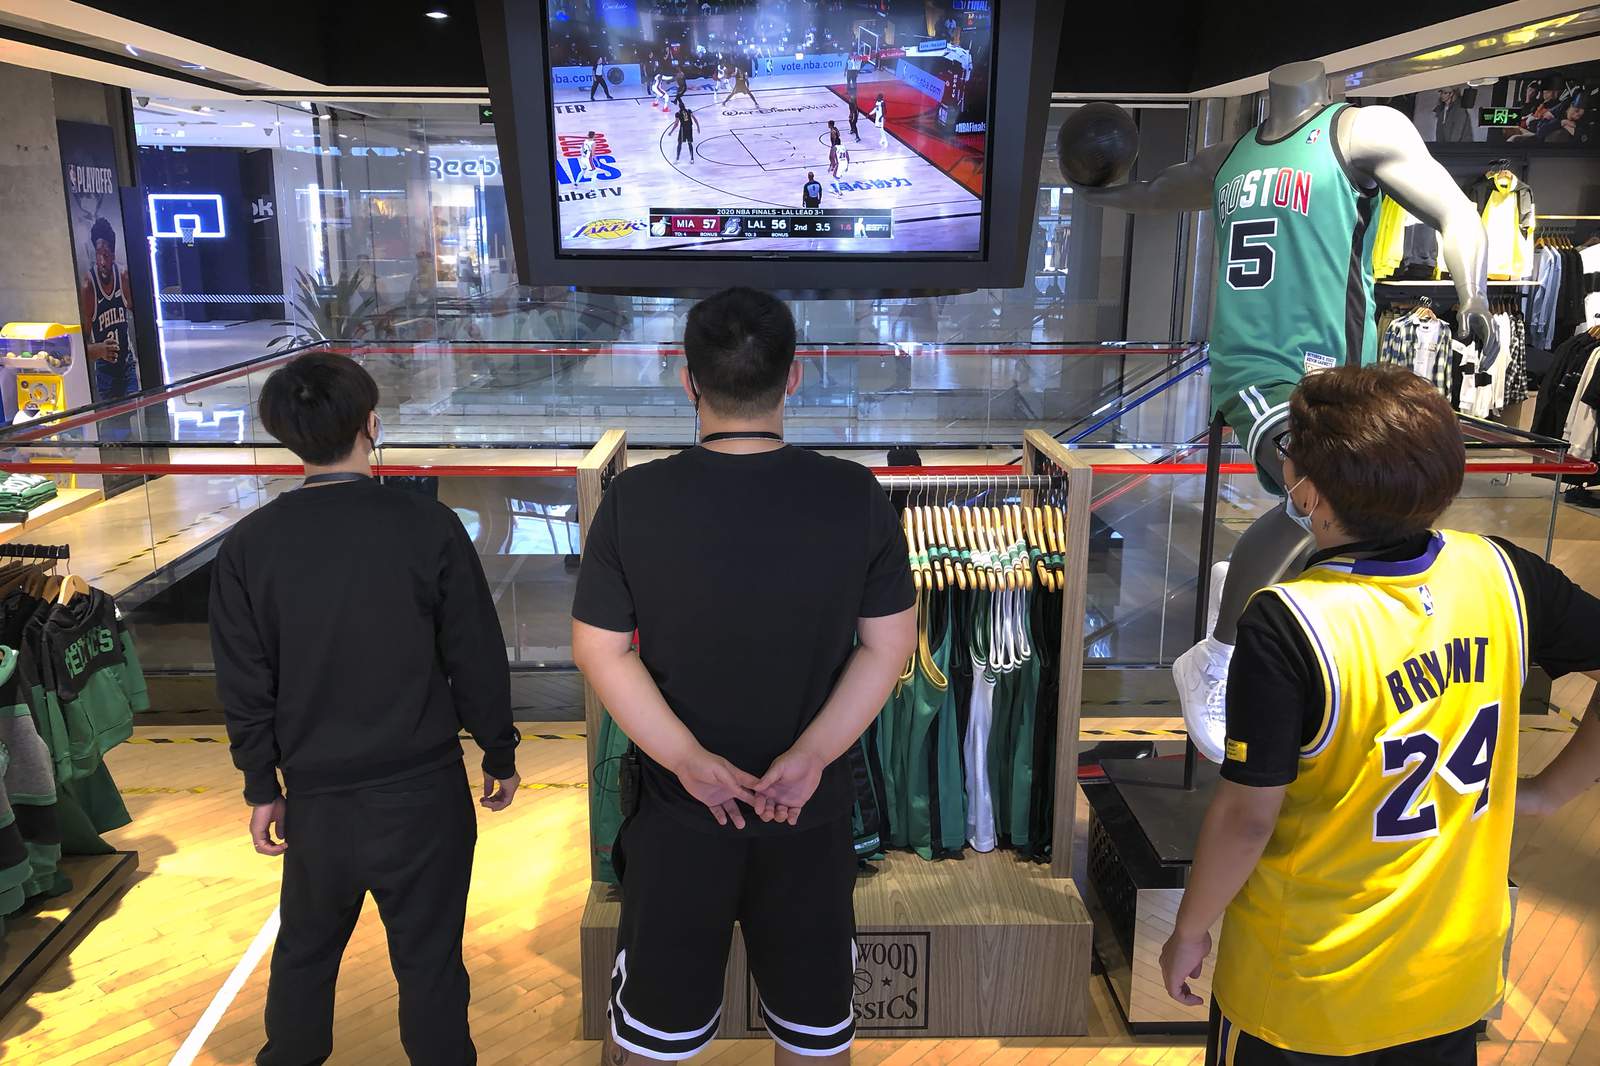 NBA returning to Chinese state television after 1-year ban